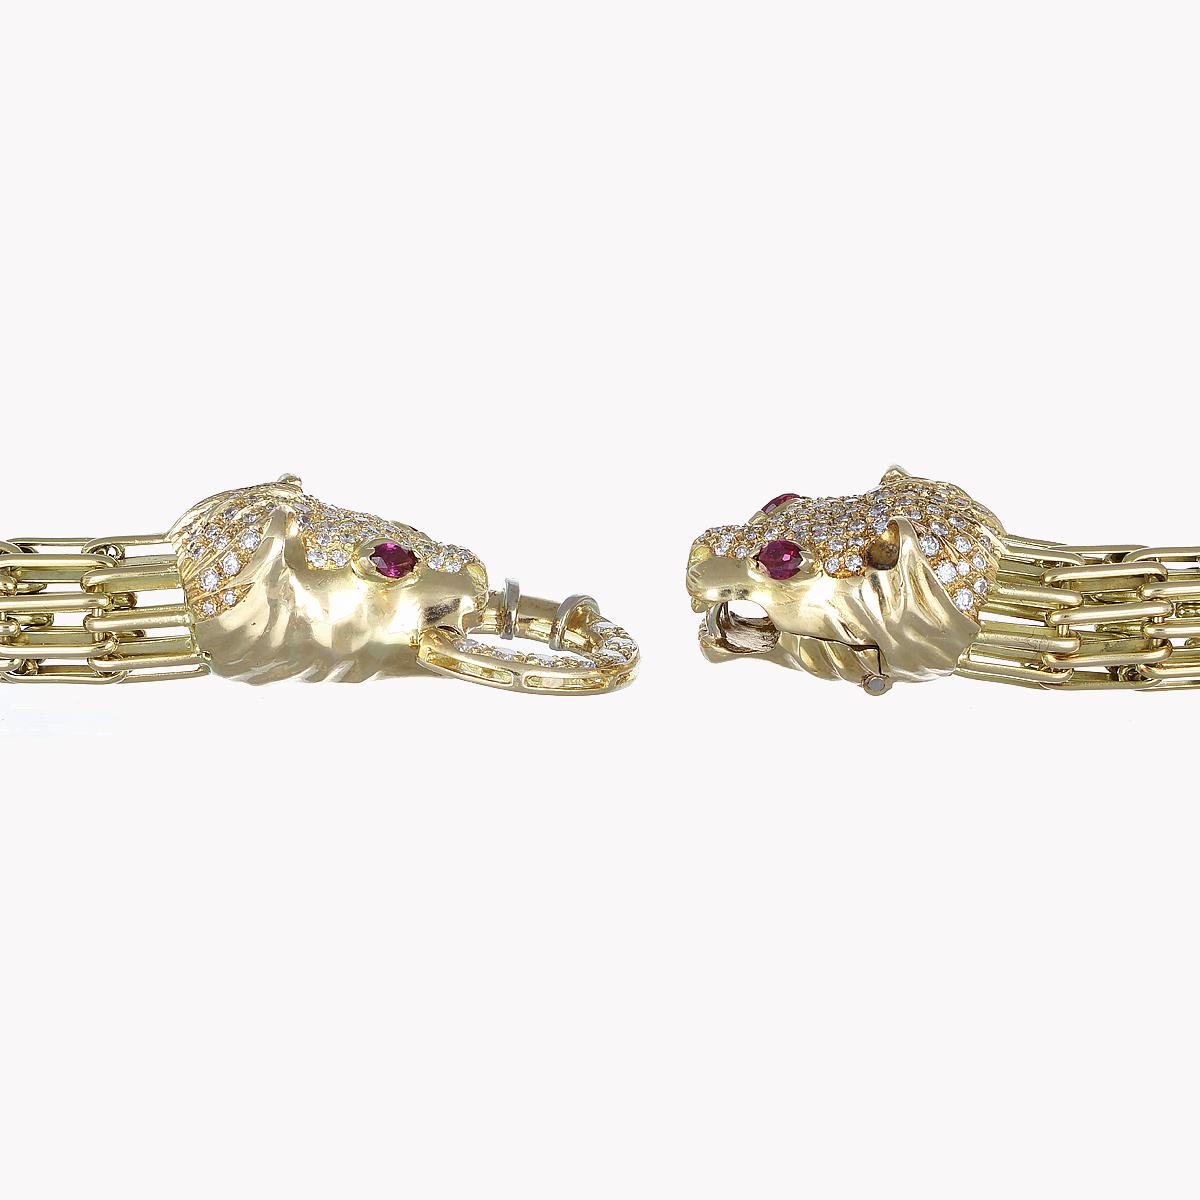 AIG Panther Parure Diamonds 5.79 Ct Marquise Rubies 2 Ct 18Kt Gold Set 3 Pieces For Sale 1